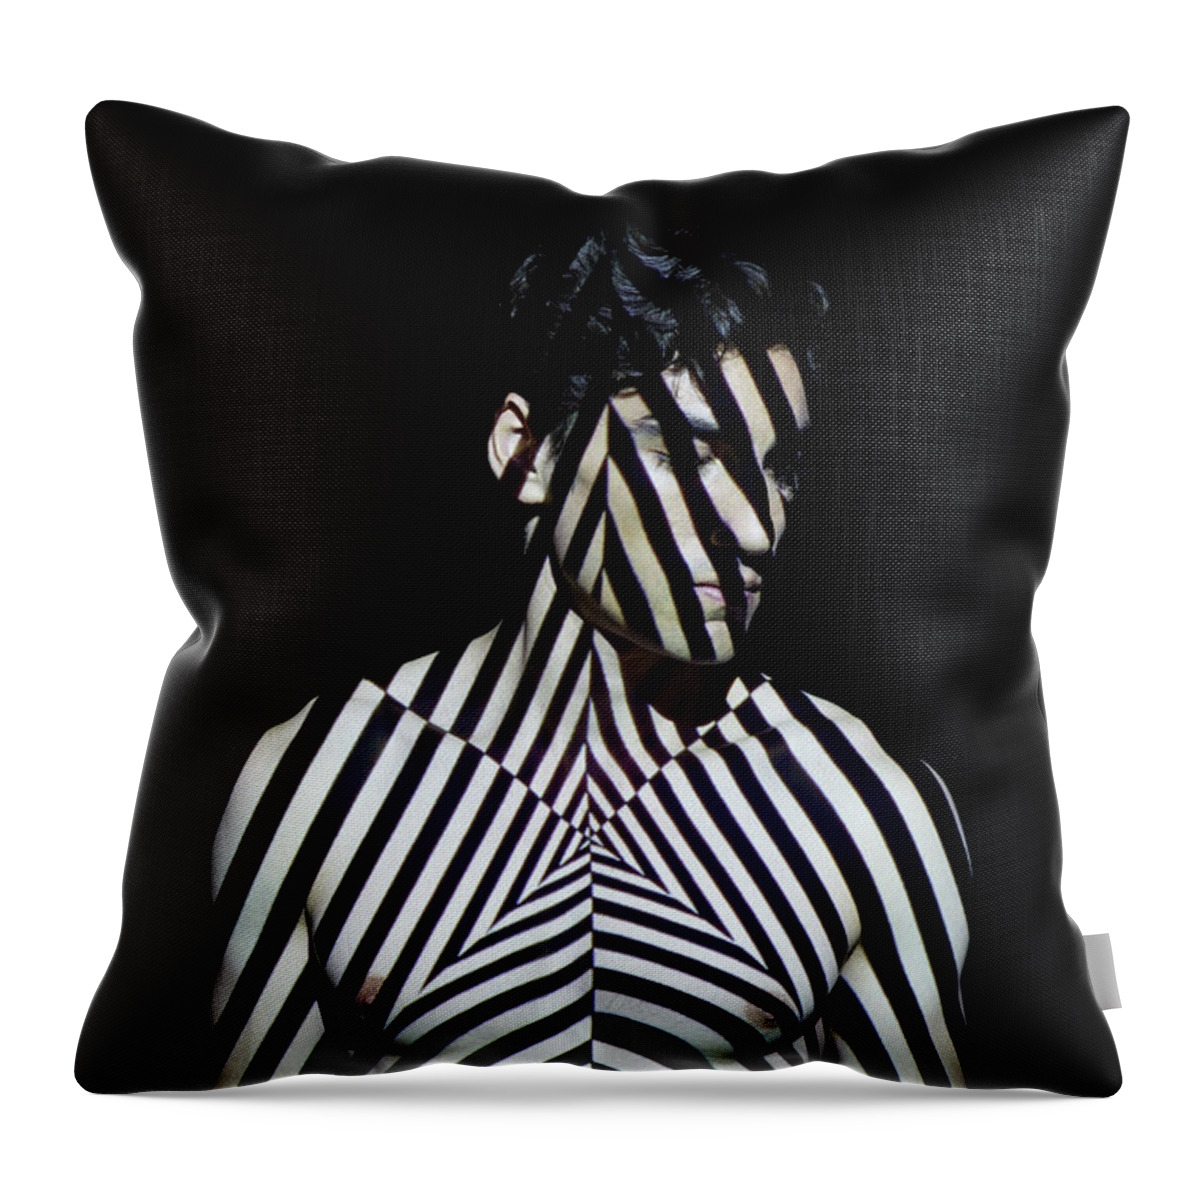 People Throw Pillow featuring the photograph Young Man Covered By Abstract Patterns by Mads Perch